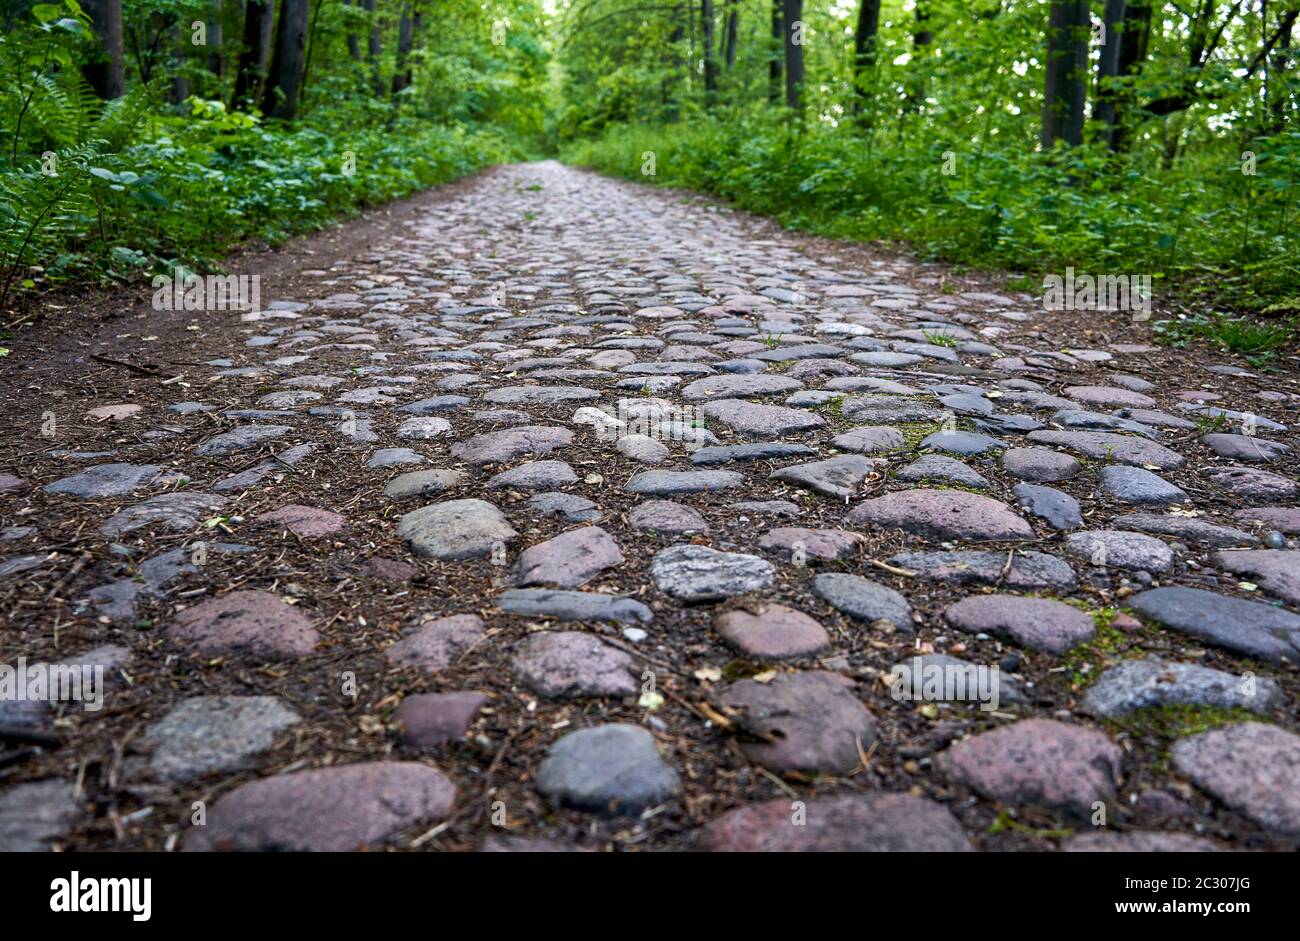 Old unused stone road in the forest Stock Photo